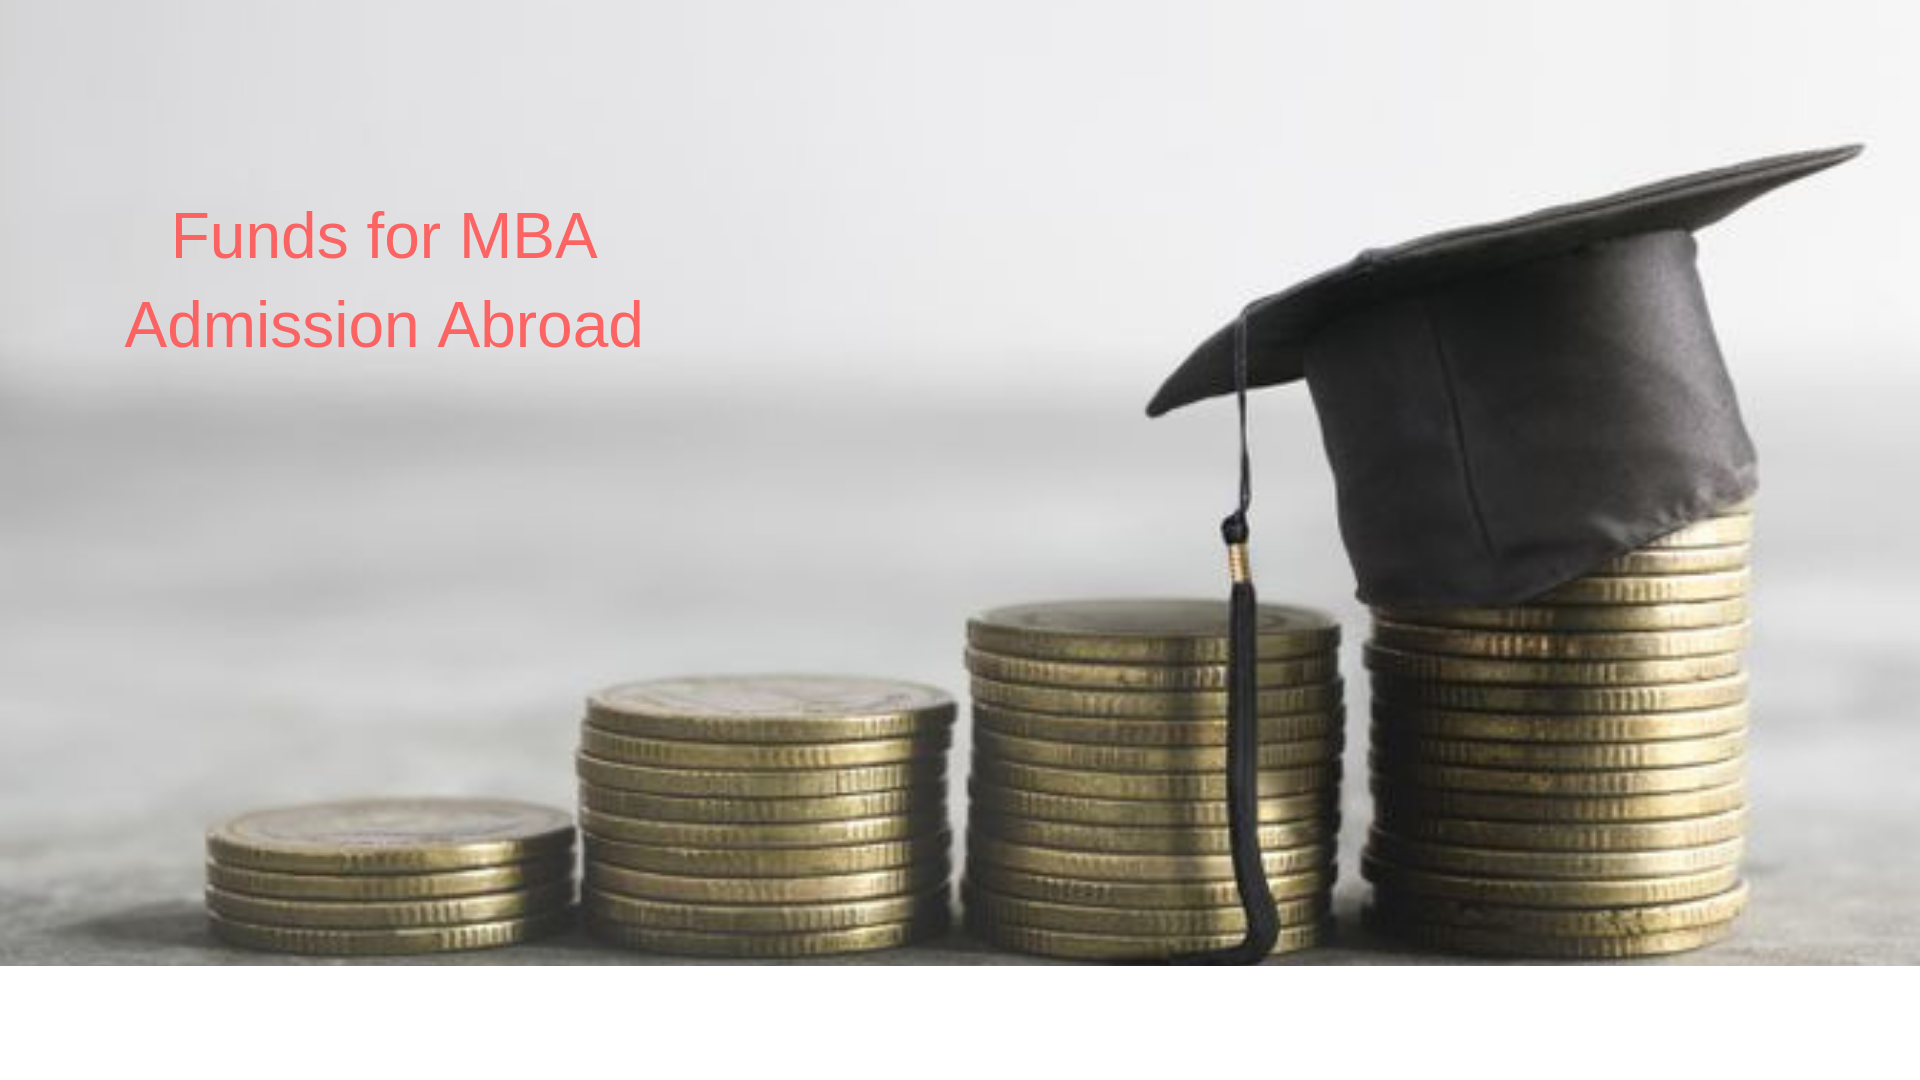 Funds for MBA Admission Abroad